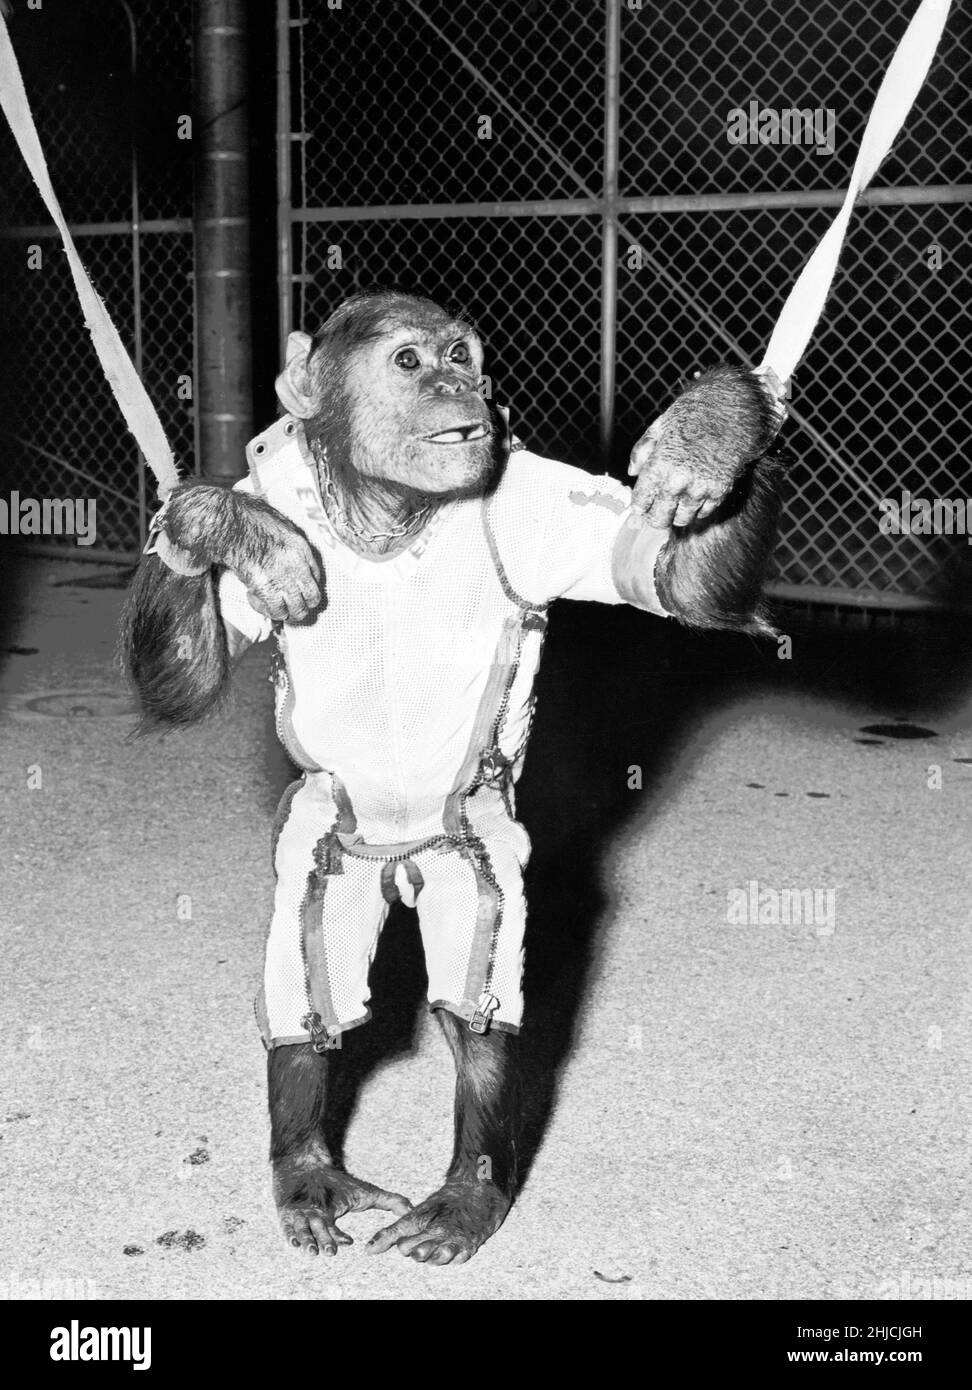 Enos wearing a spacesuit and wrist tethers. Enos (d. November 4, 1962) was the 2nd chimp launched into space and the first chimp to achieve Earth orbit. Enos' flight occurred on November 29, 1961. His training was more intense for him than for his predecessor Ham, because Enos was exposed to weightlessness and higher gs for longer periods of time. His training included psychomotor instruction and aircraft flights. Enos died of shigellosis-related dysentery, which was resistant to then-known antibiotics. Pathologists reported no symptoms that could be attributed or related to his space flight. Stock Photo